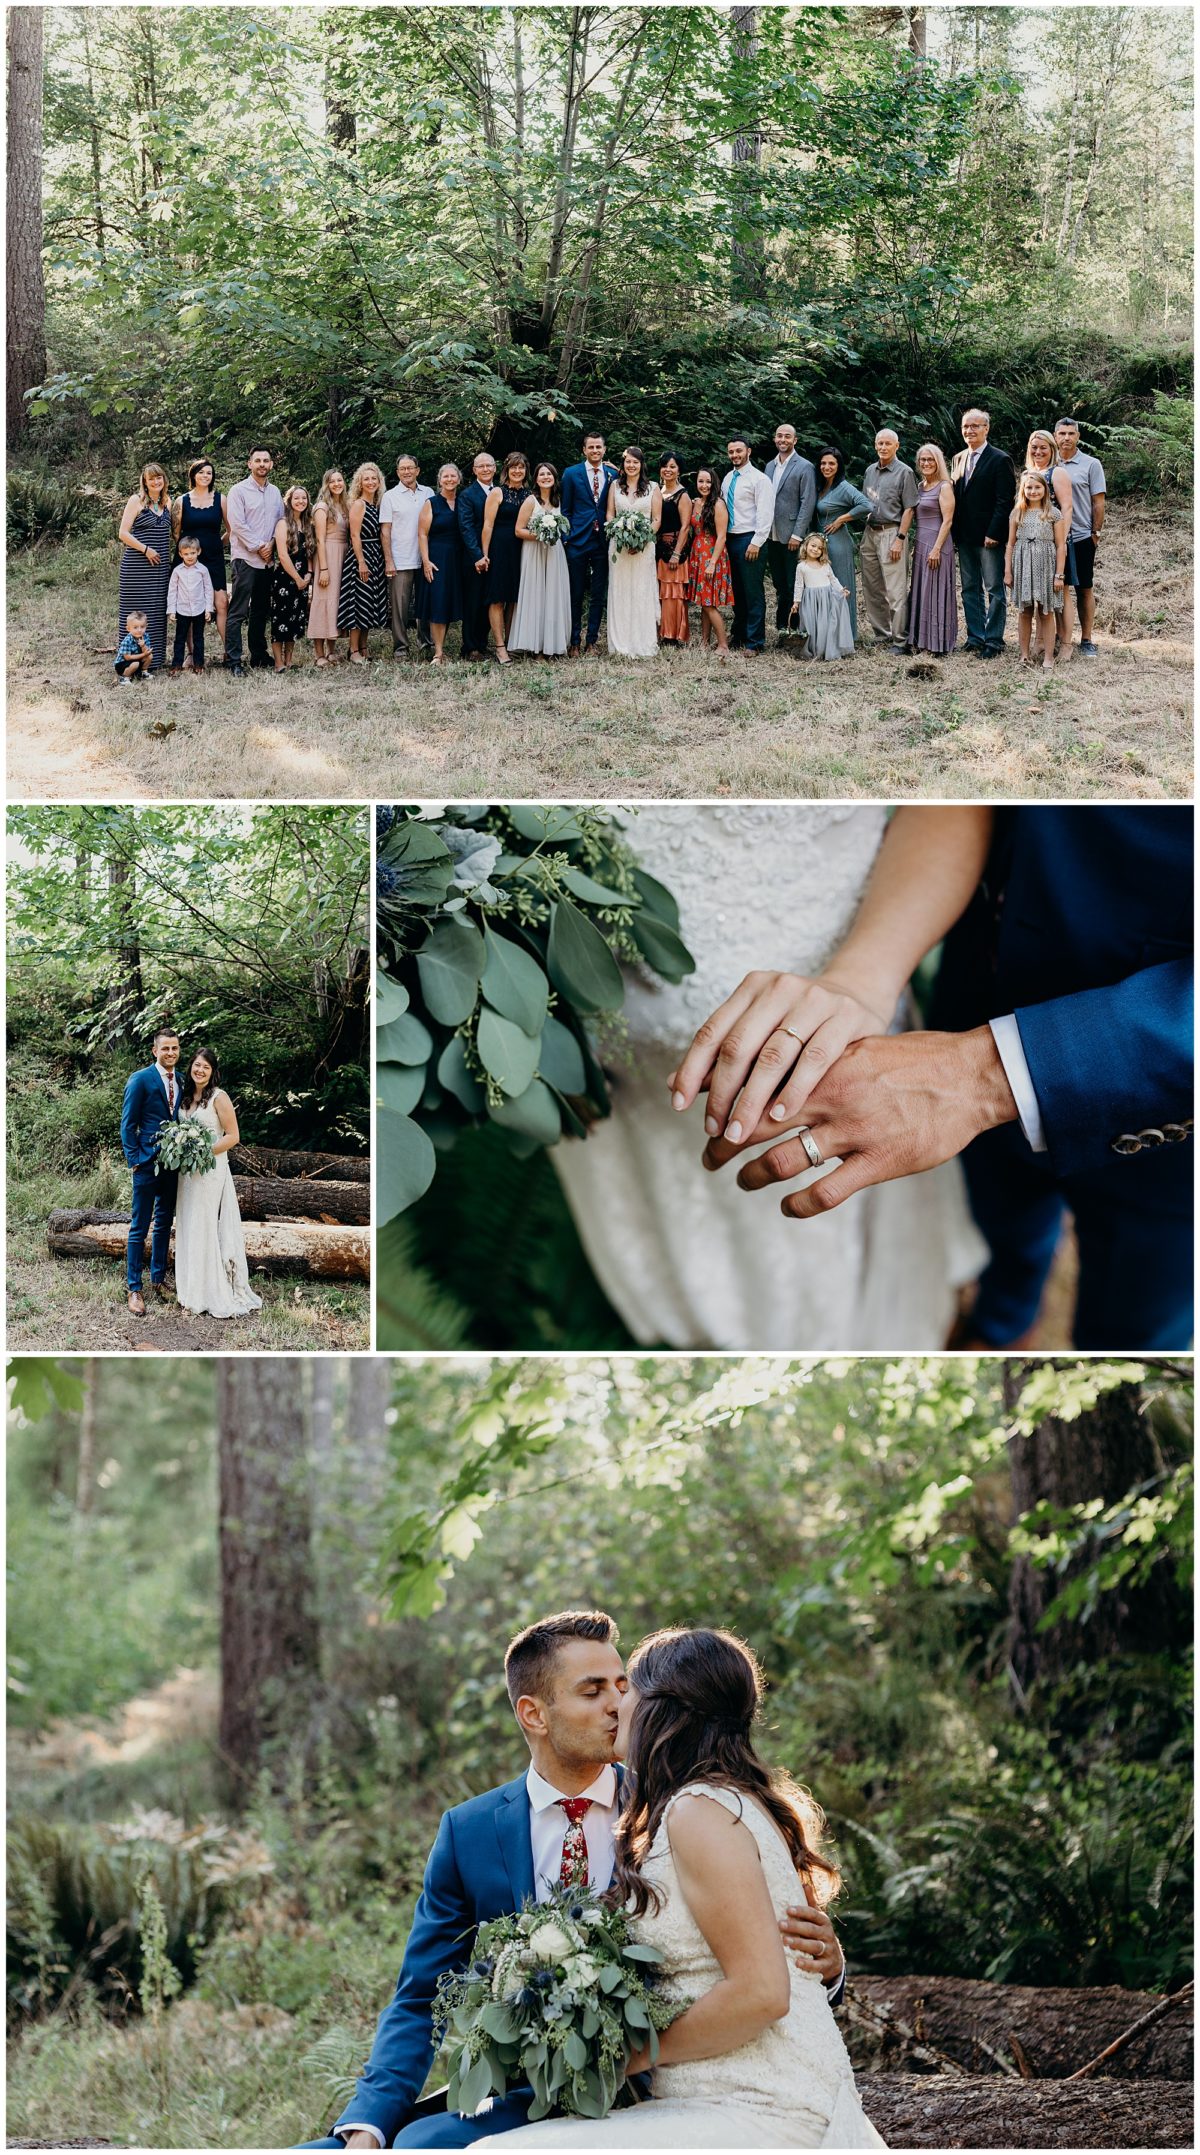 They're married! Photography by PNW wedding photographer, Briana Morrison